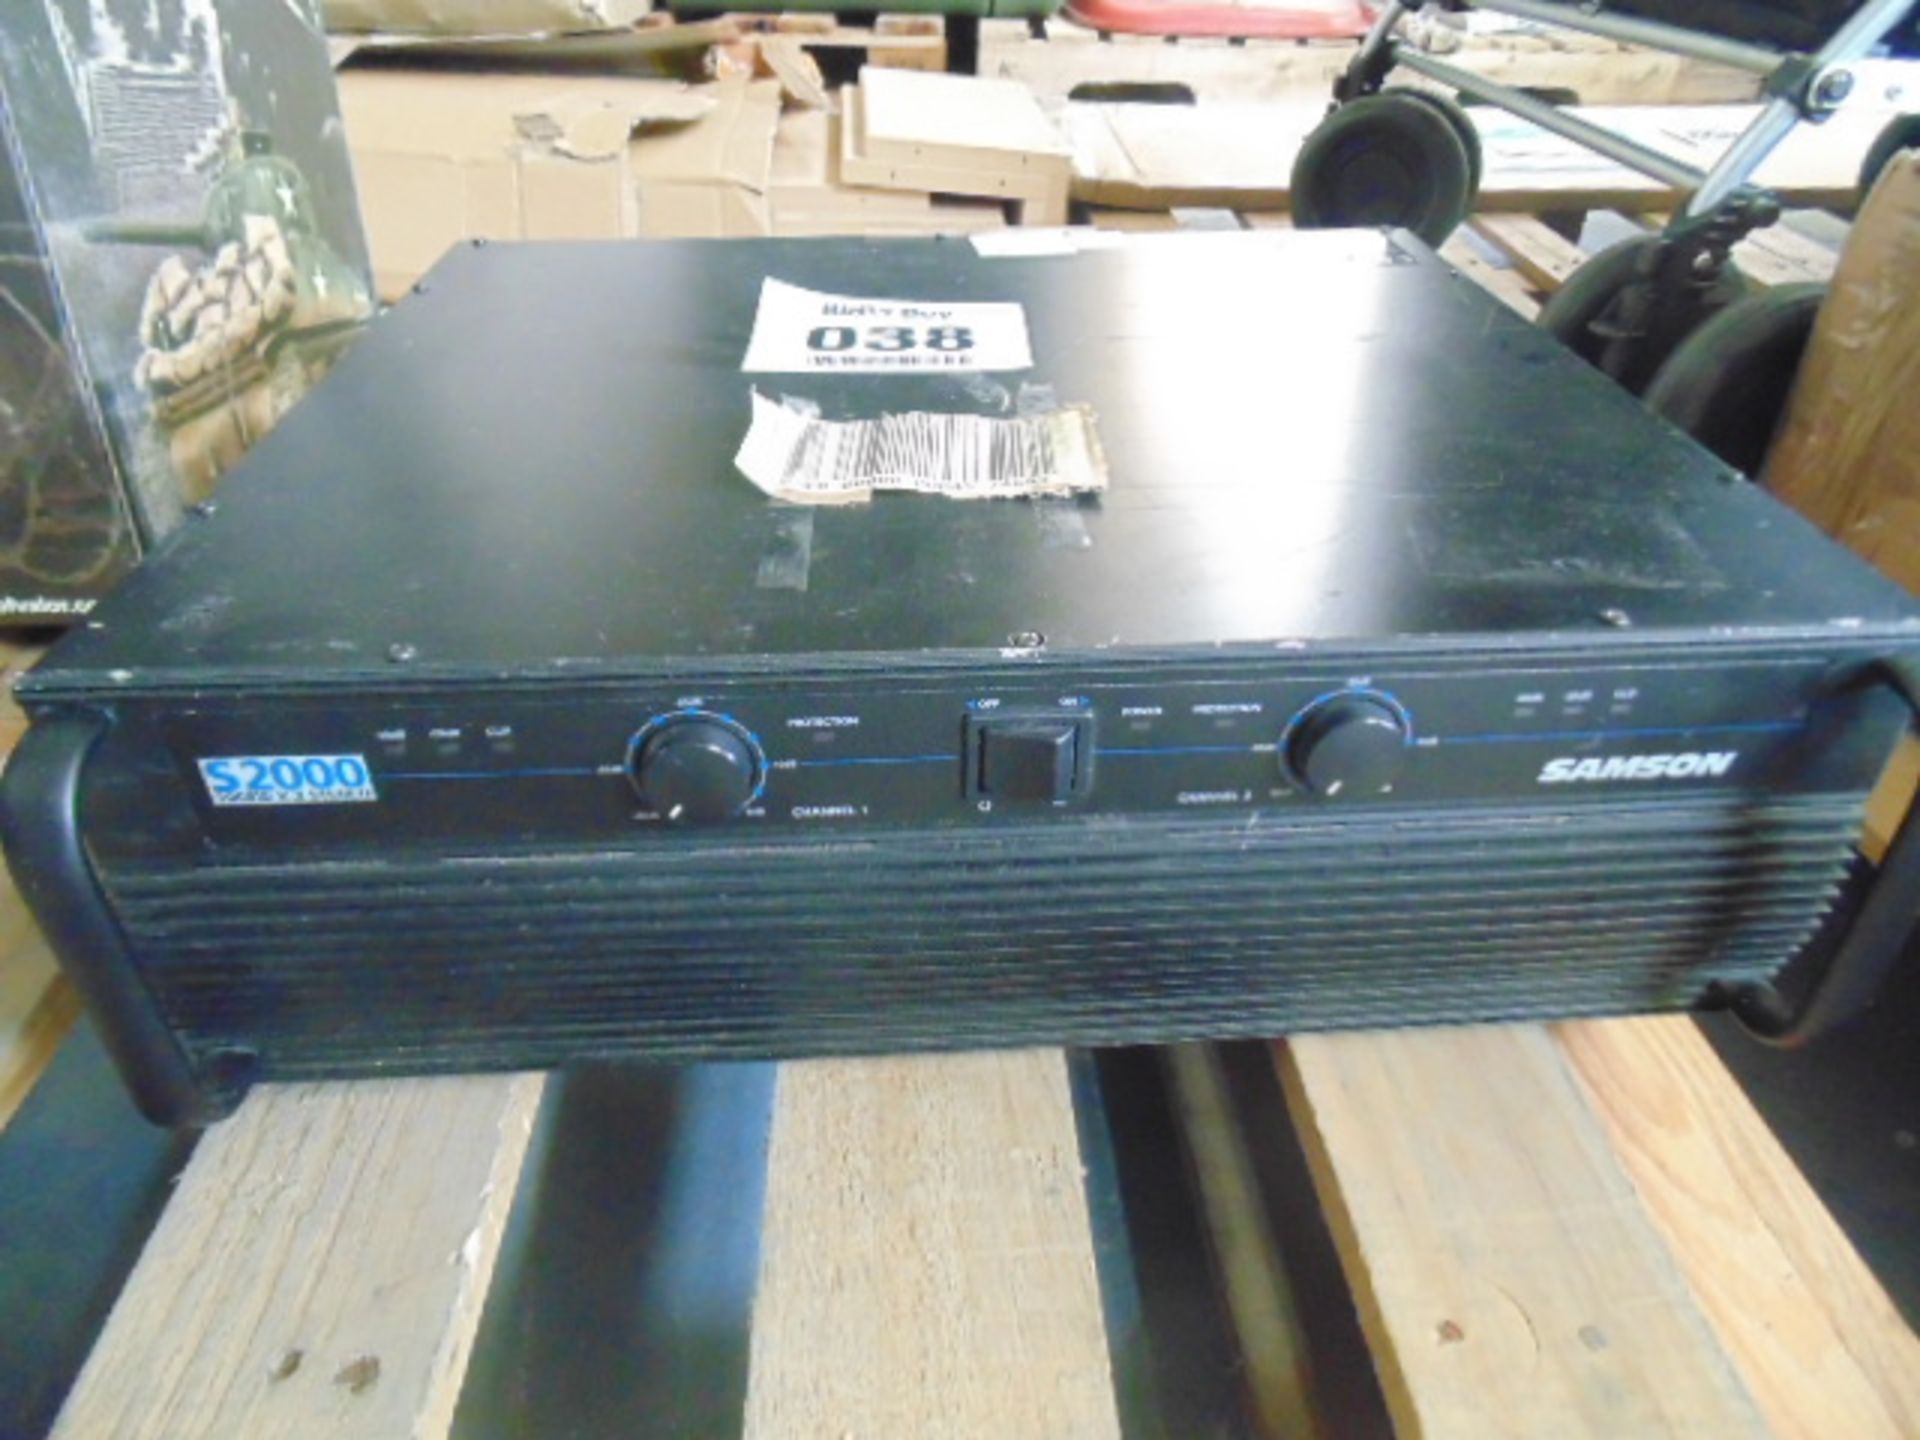 Samson S2000 2000W PA power amplifier 2 channel amp stereo working